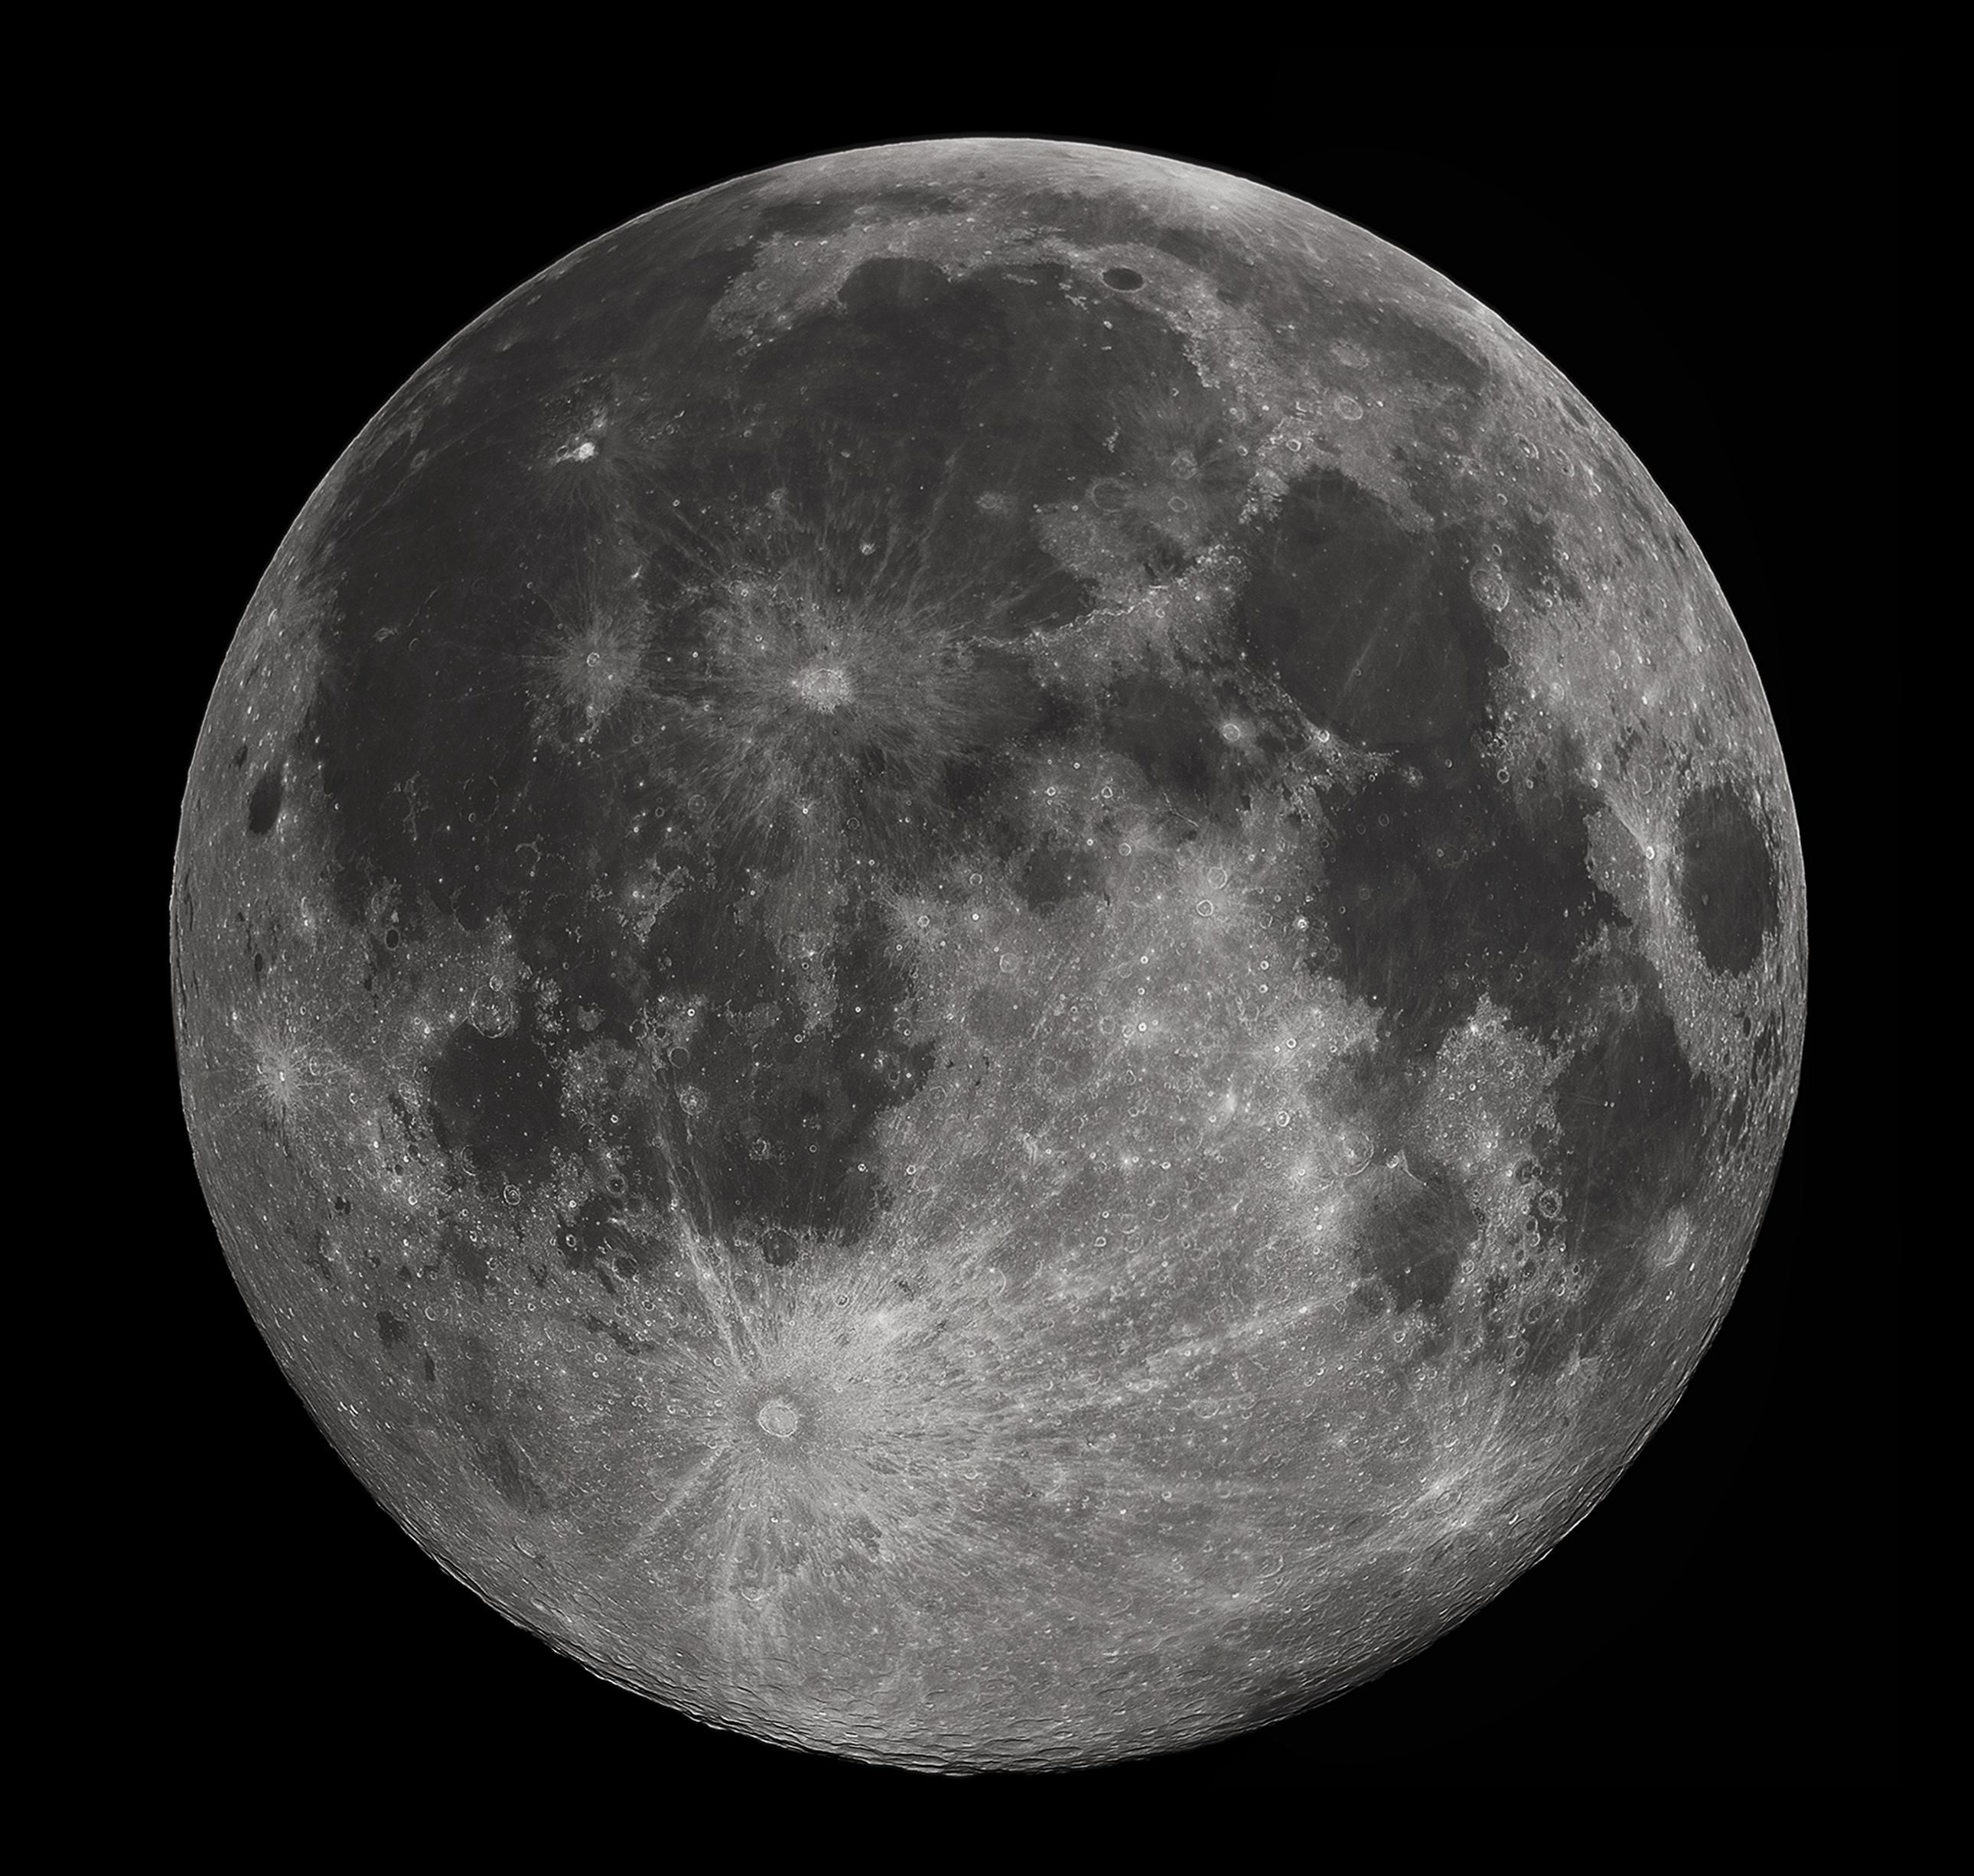 Don't forget, tonight the moon will be visible from earth. Last time this happened was over 24 hours ago. #NASA